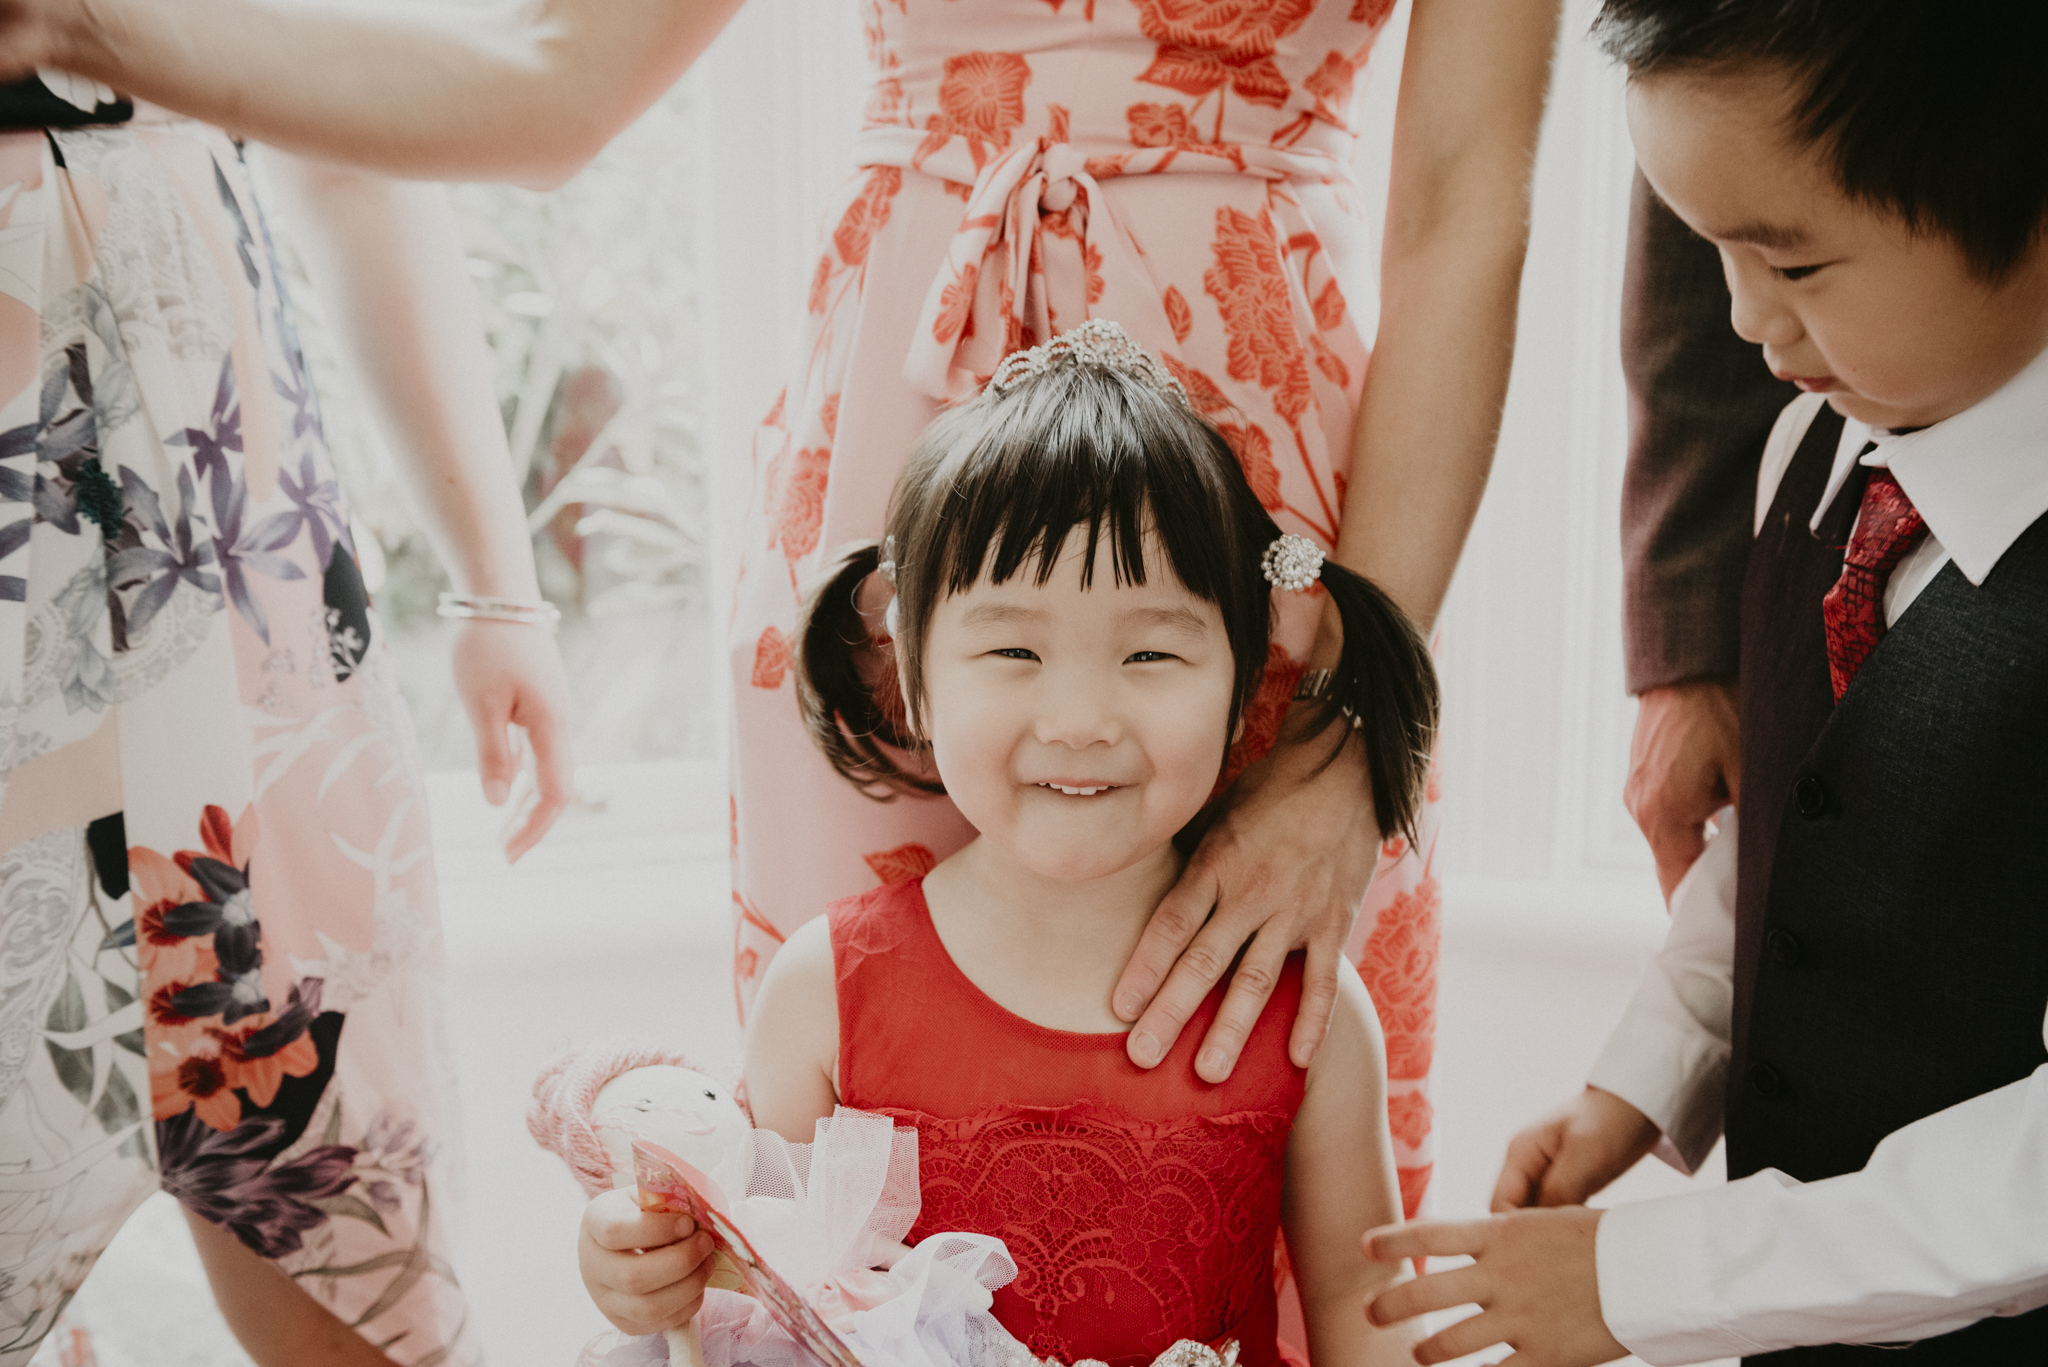 agnes-duy-15th-december-2018-chinese-vietnamese-wedding-tea-ceremony-yarraville-home-house-documentary-candid-photographer-sarah-matler-photography-48